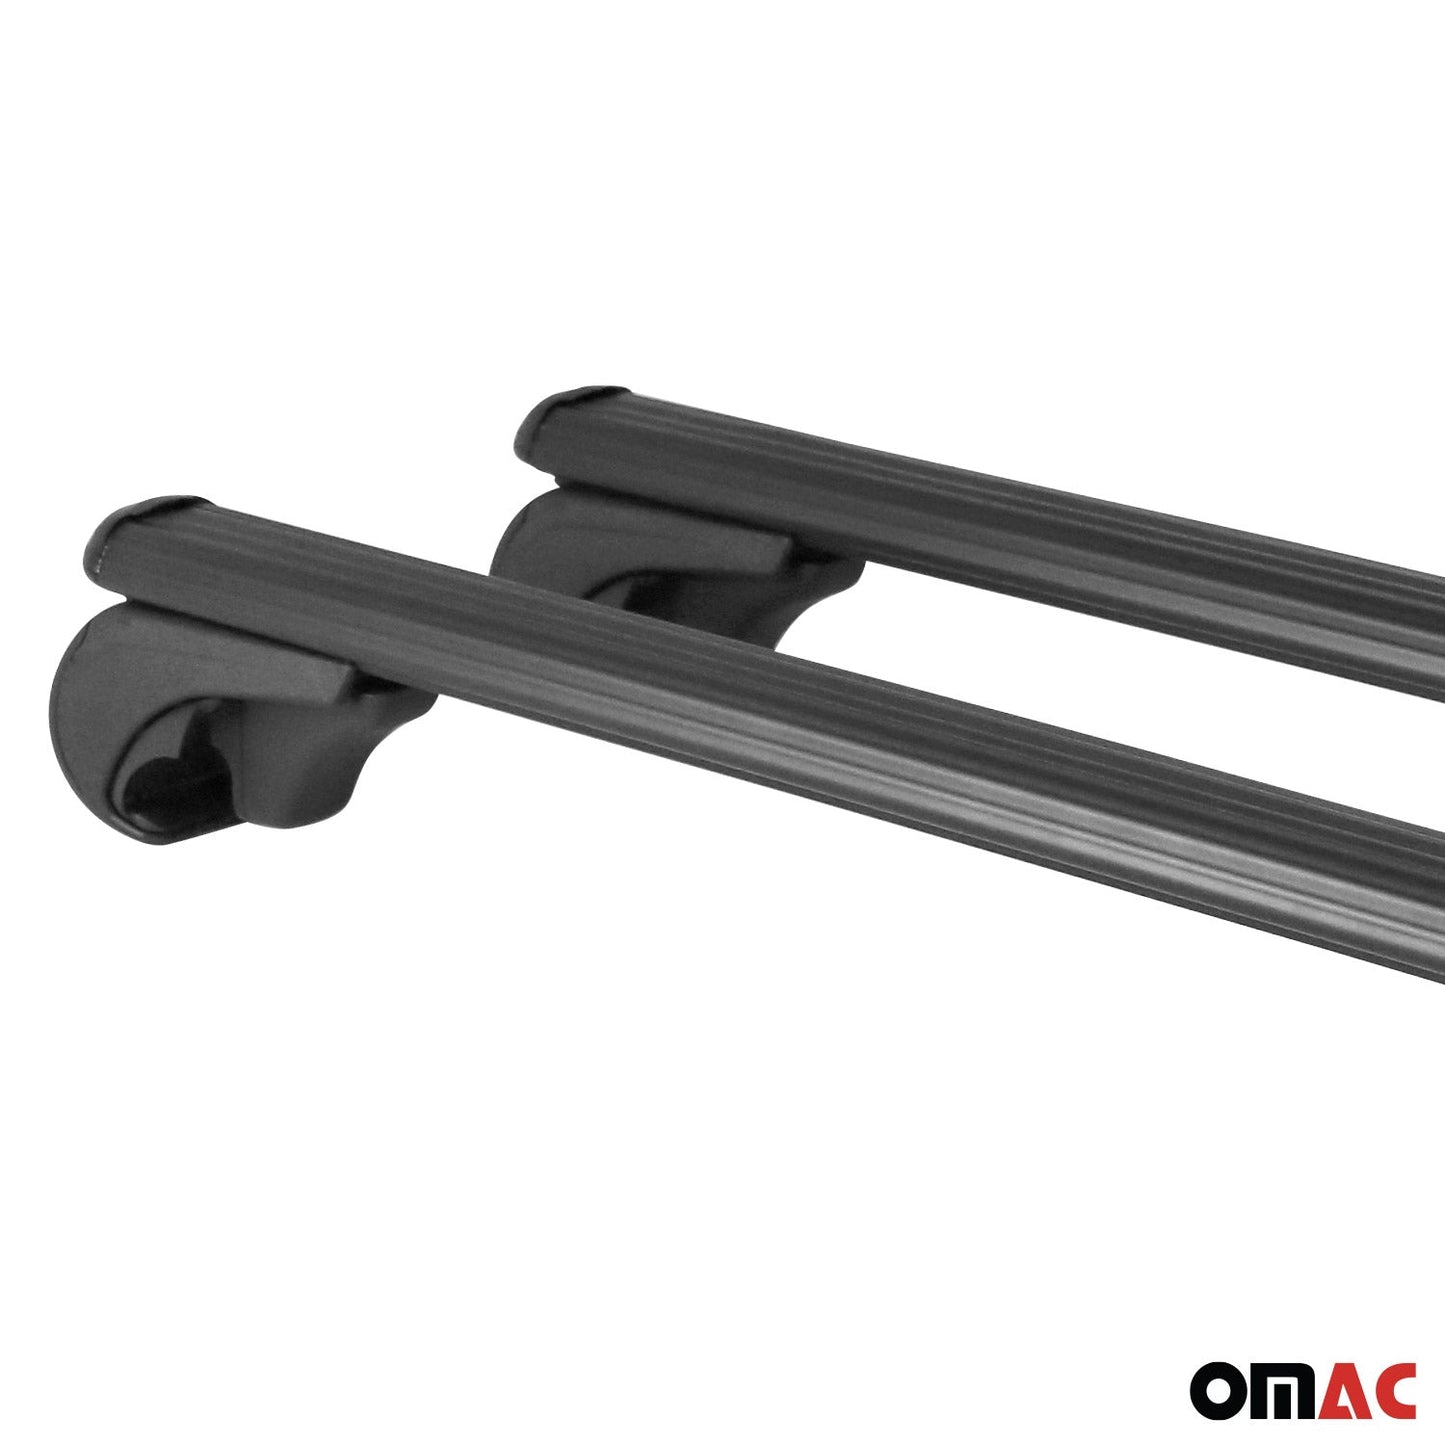 OMAC Lockable Roof Rack Cross Bars Luggage Carrier for Jeep Liberty 2008-2012 Black 17079696929XLB